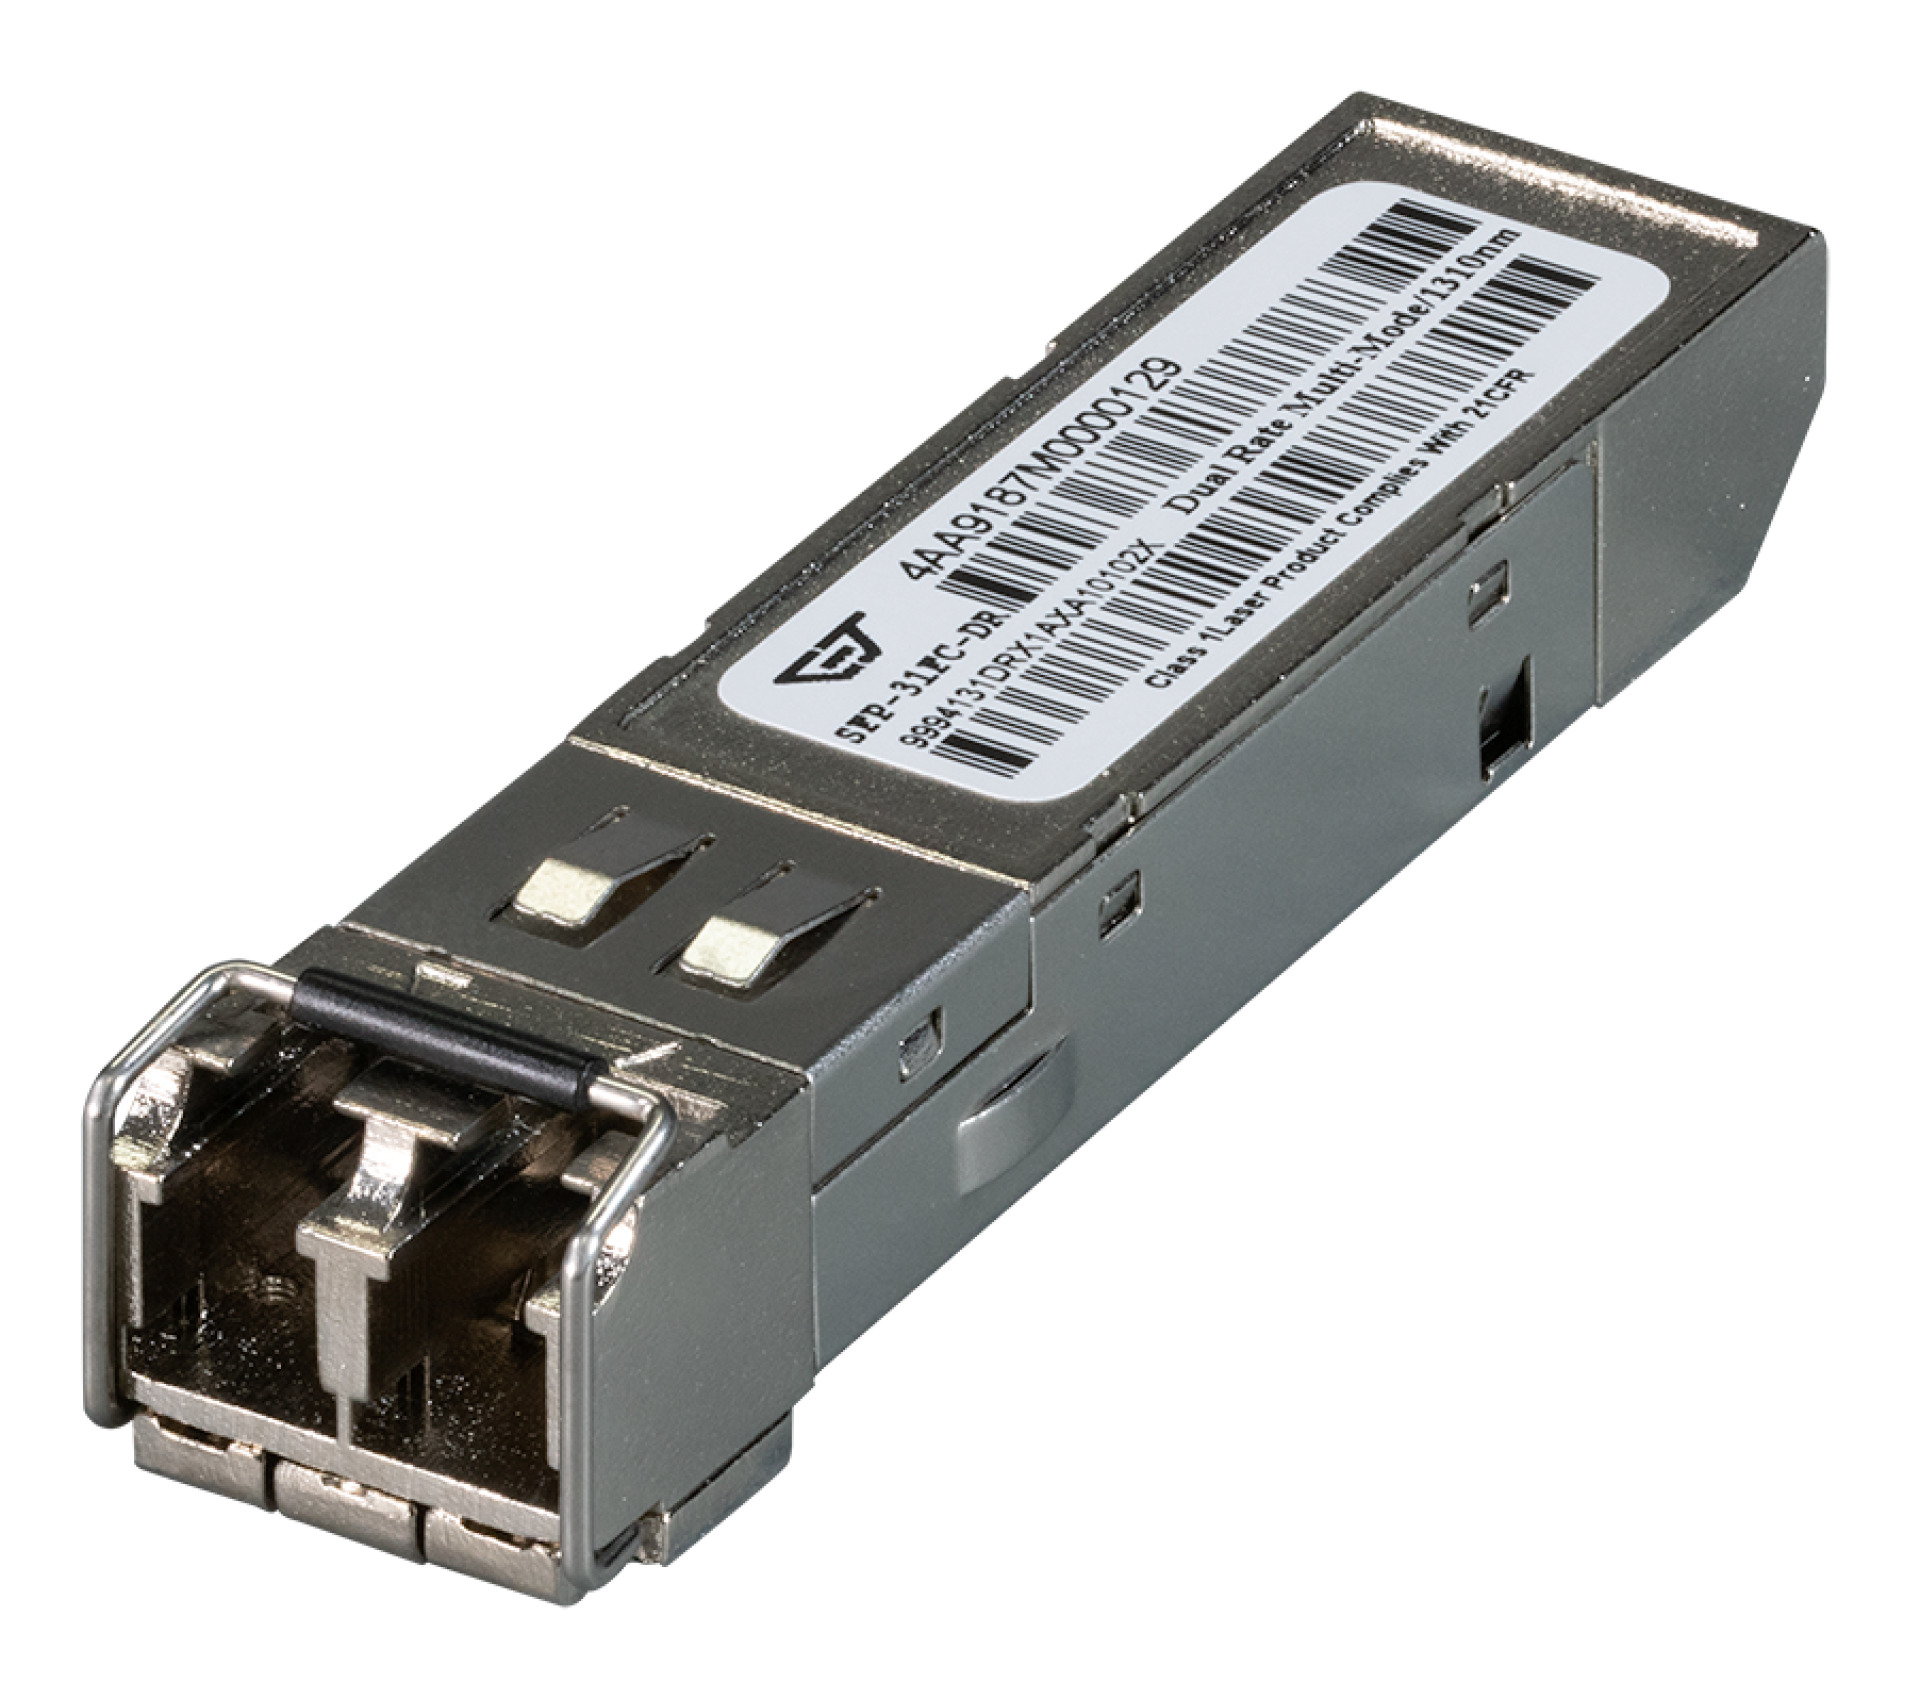 SFP 100/1000Mbps Dual Rate, MM, LC,,2km/550M, 1310nm, 0° to 70°C